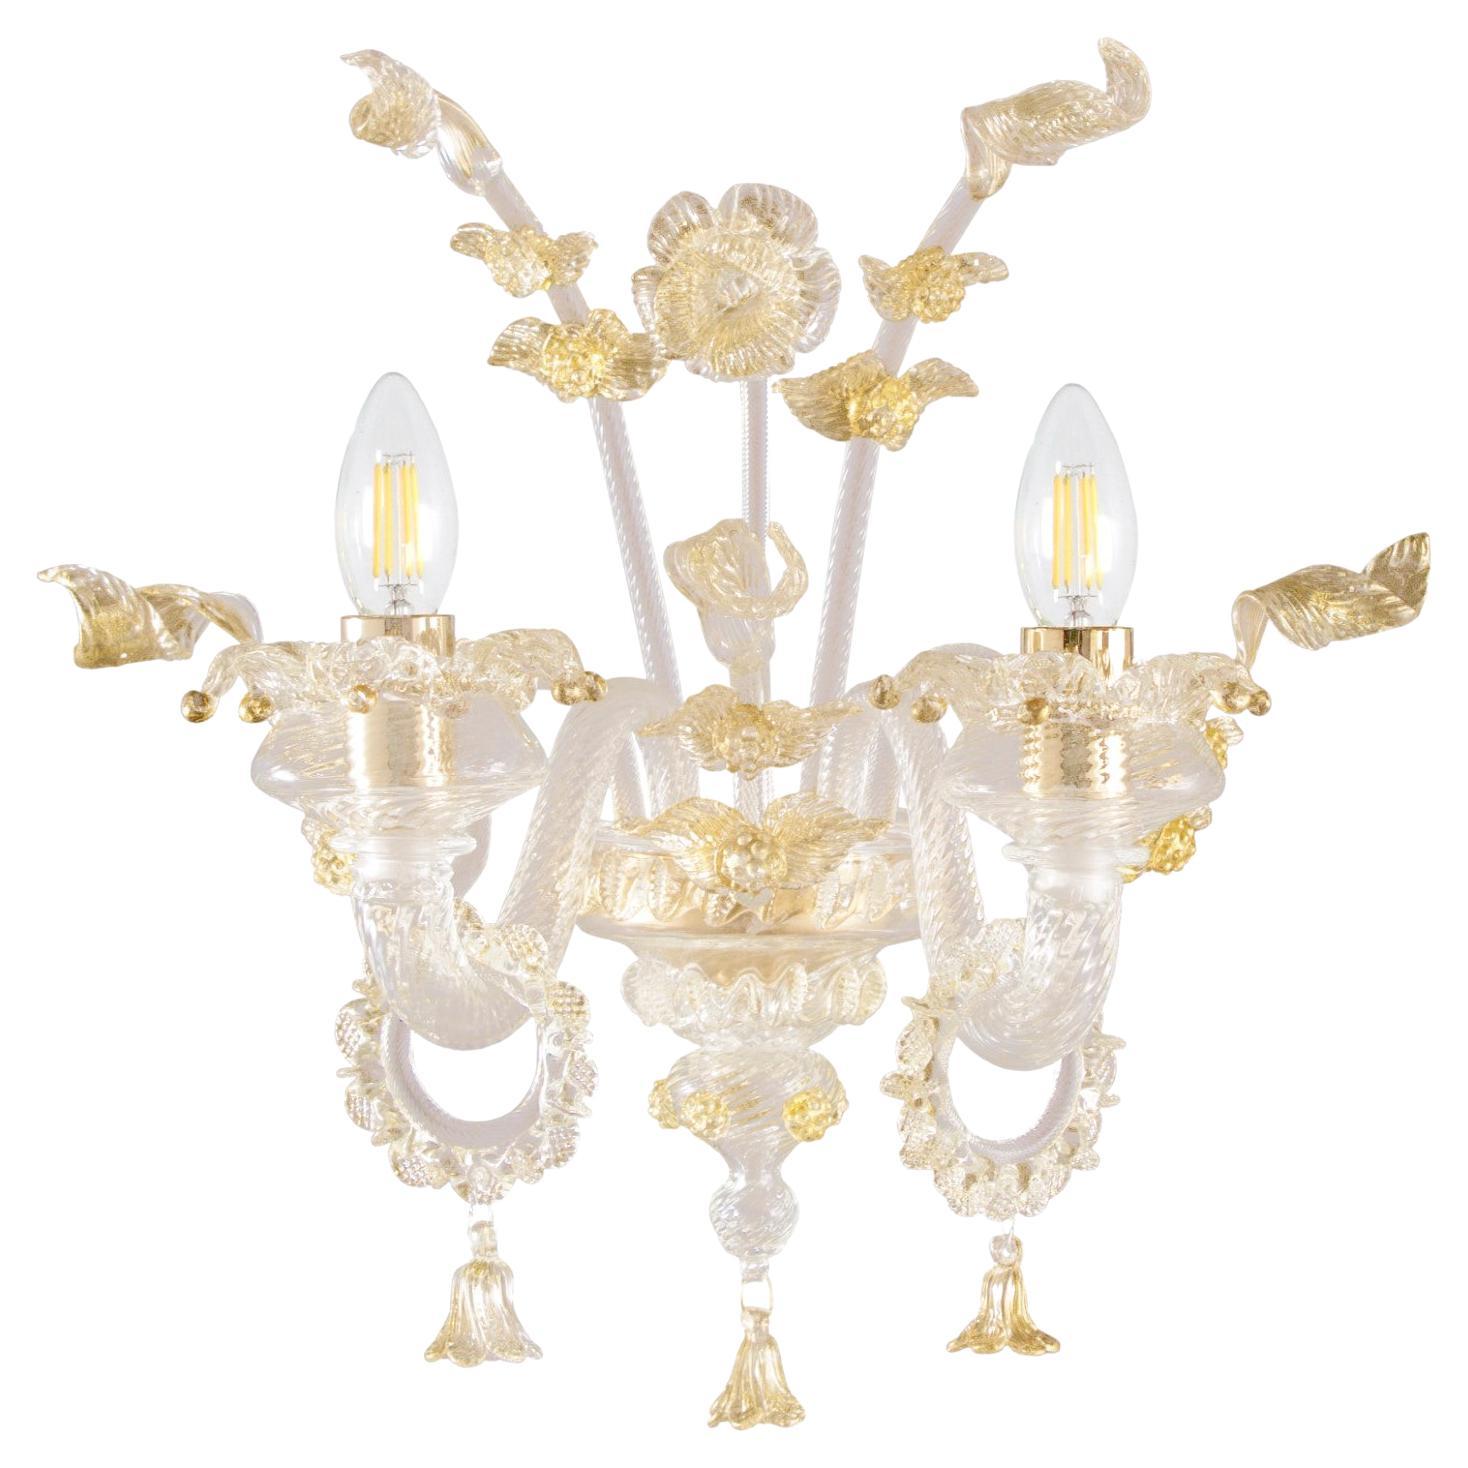 Rich Murano Sconce 2 Arms Crystal and Gold Murano Glass Fenix by Multiforme